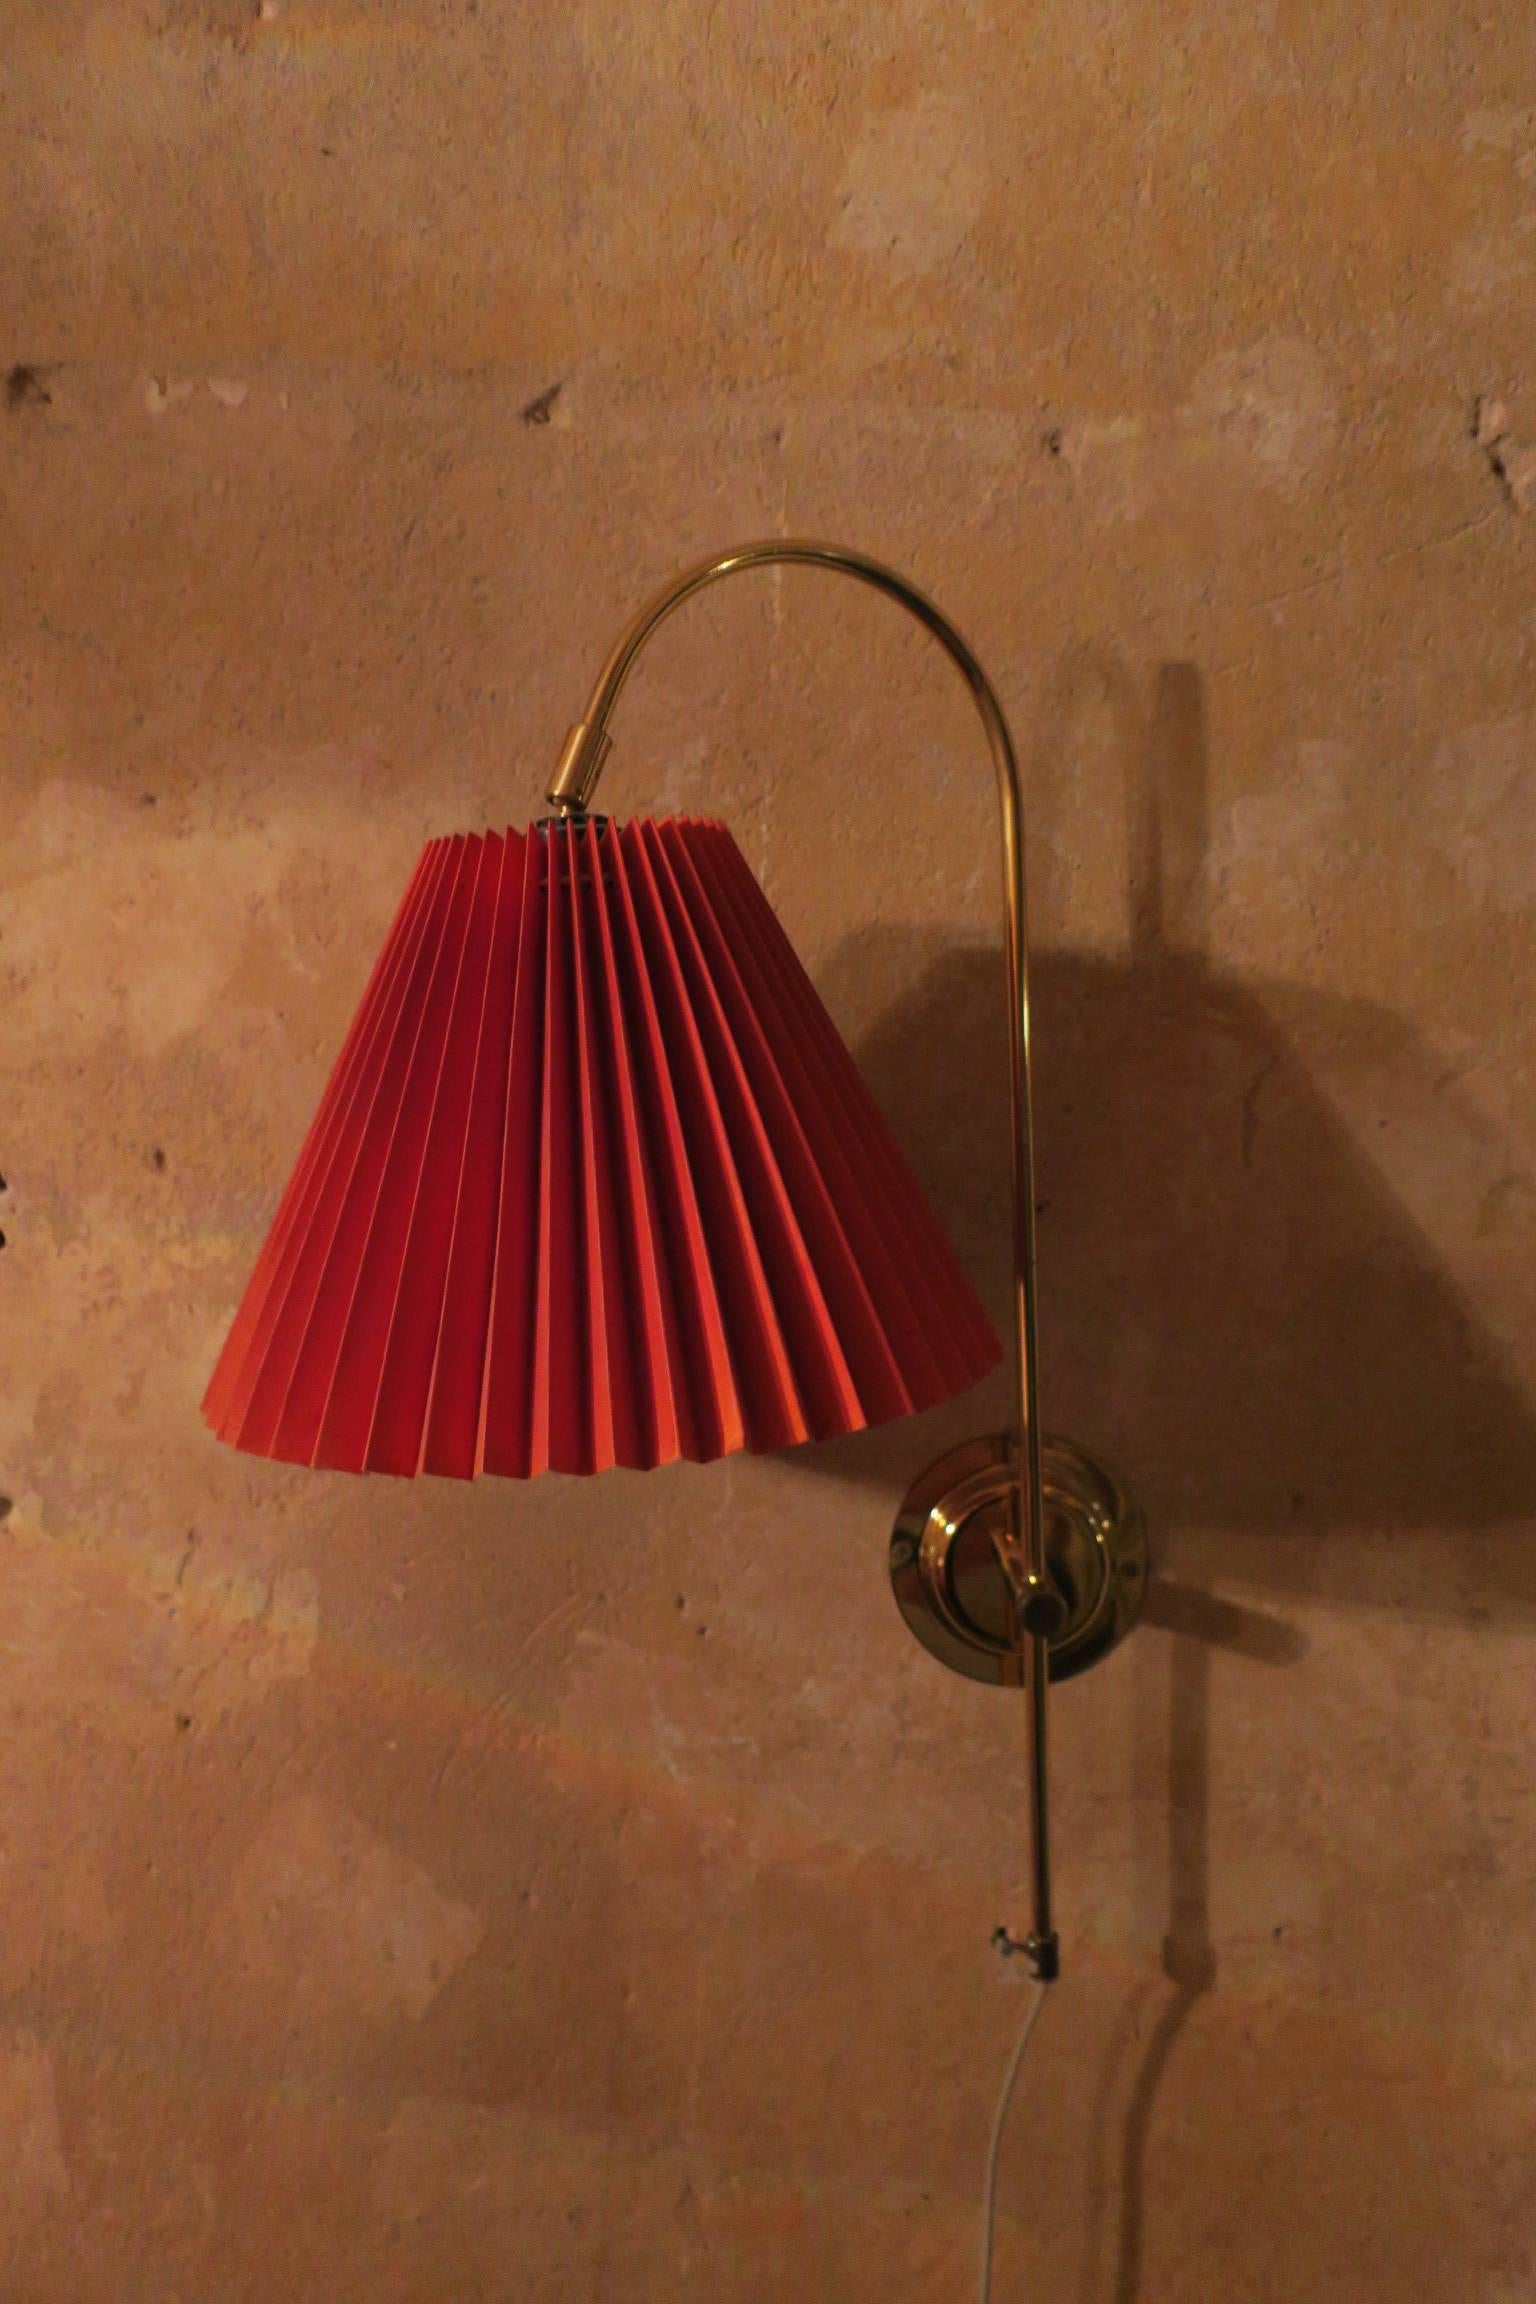 Midcentury Danish swivel brass sconce. Swings through 180 degree, moves up and down on its holder and the lamp head is adjustable.

Light fixture takes standard US and Canadian light bulbs as well as European bulbs.